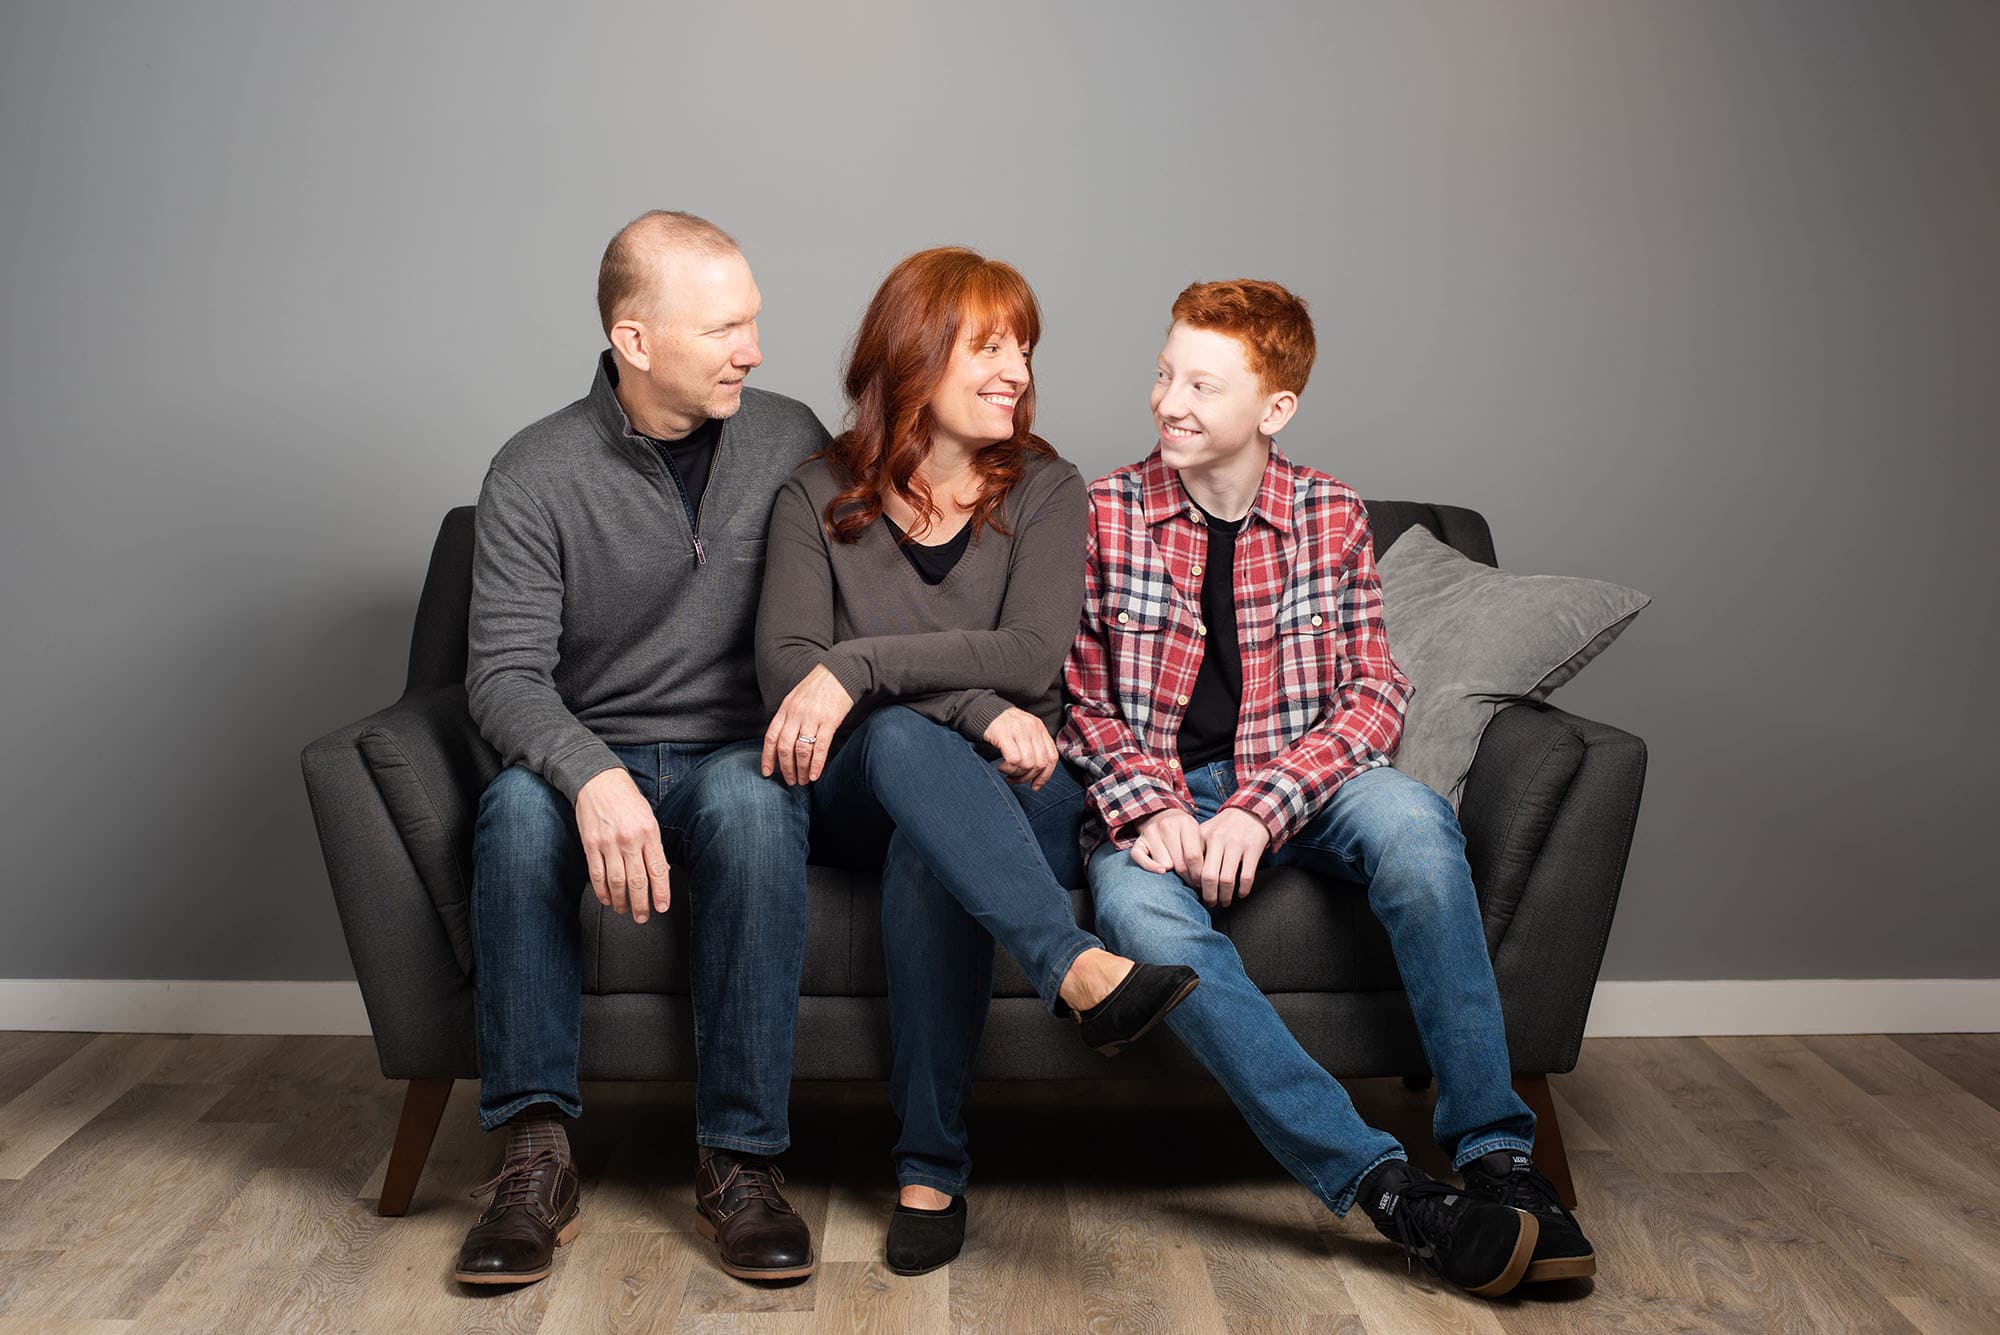 studio portrait family of a mom, dad, and son on the couch